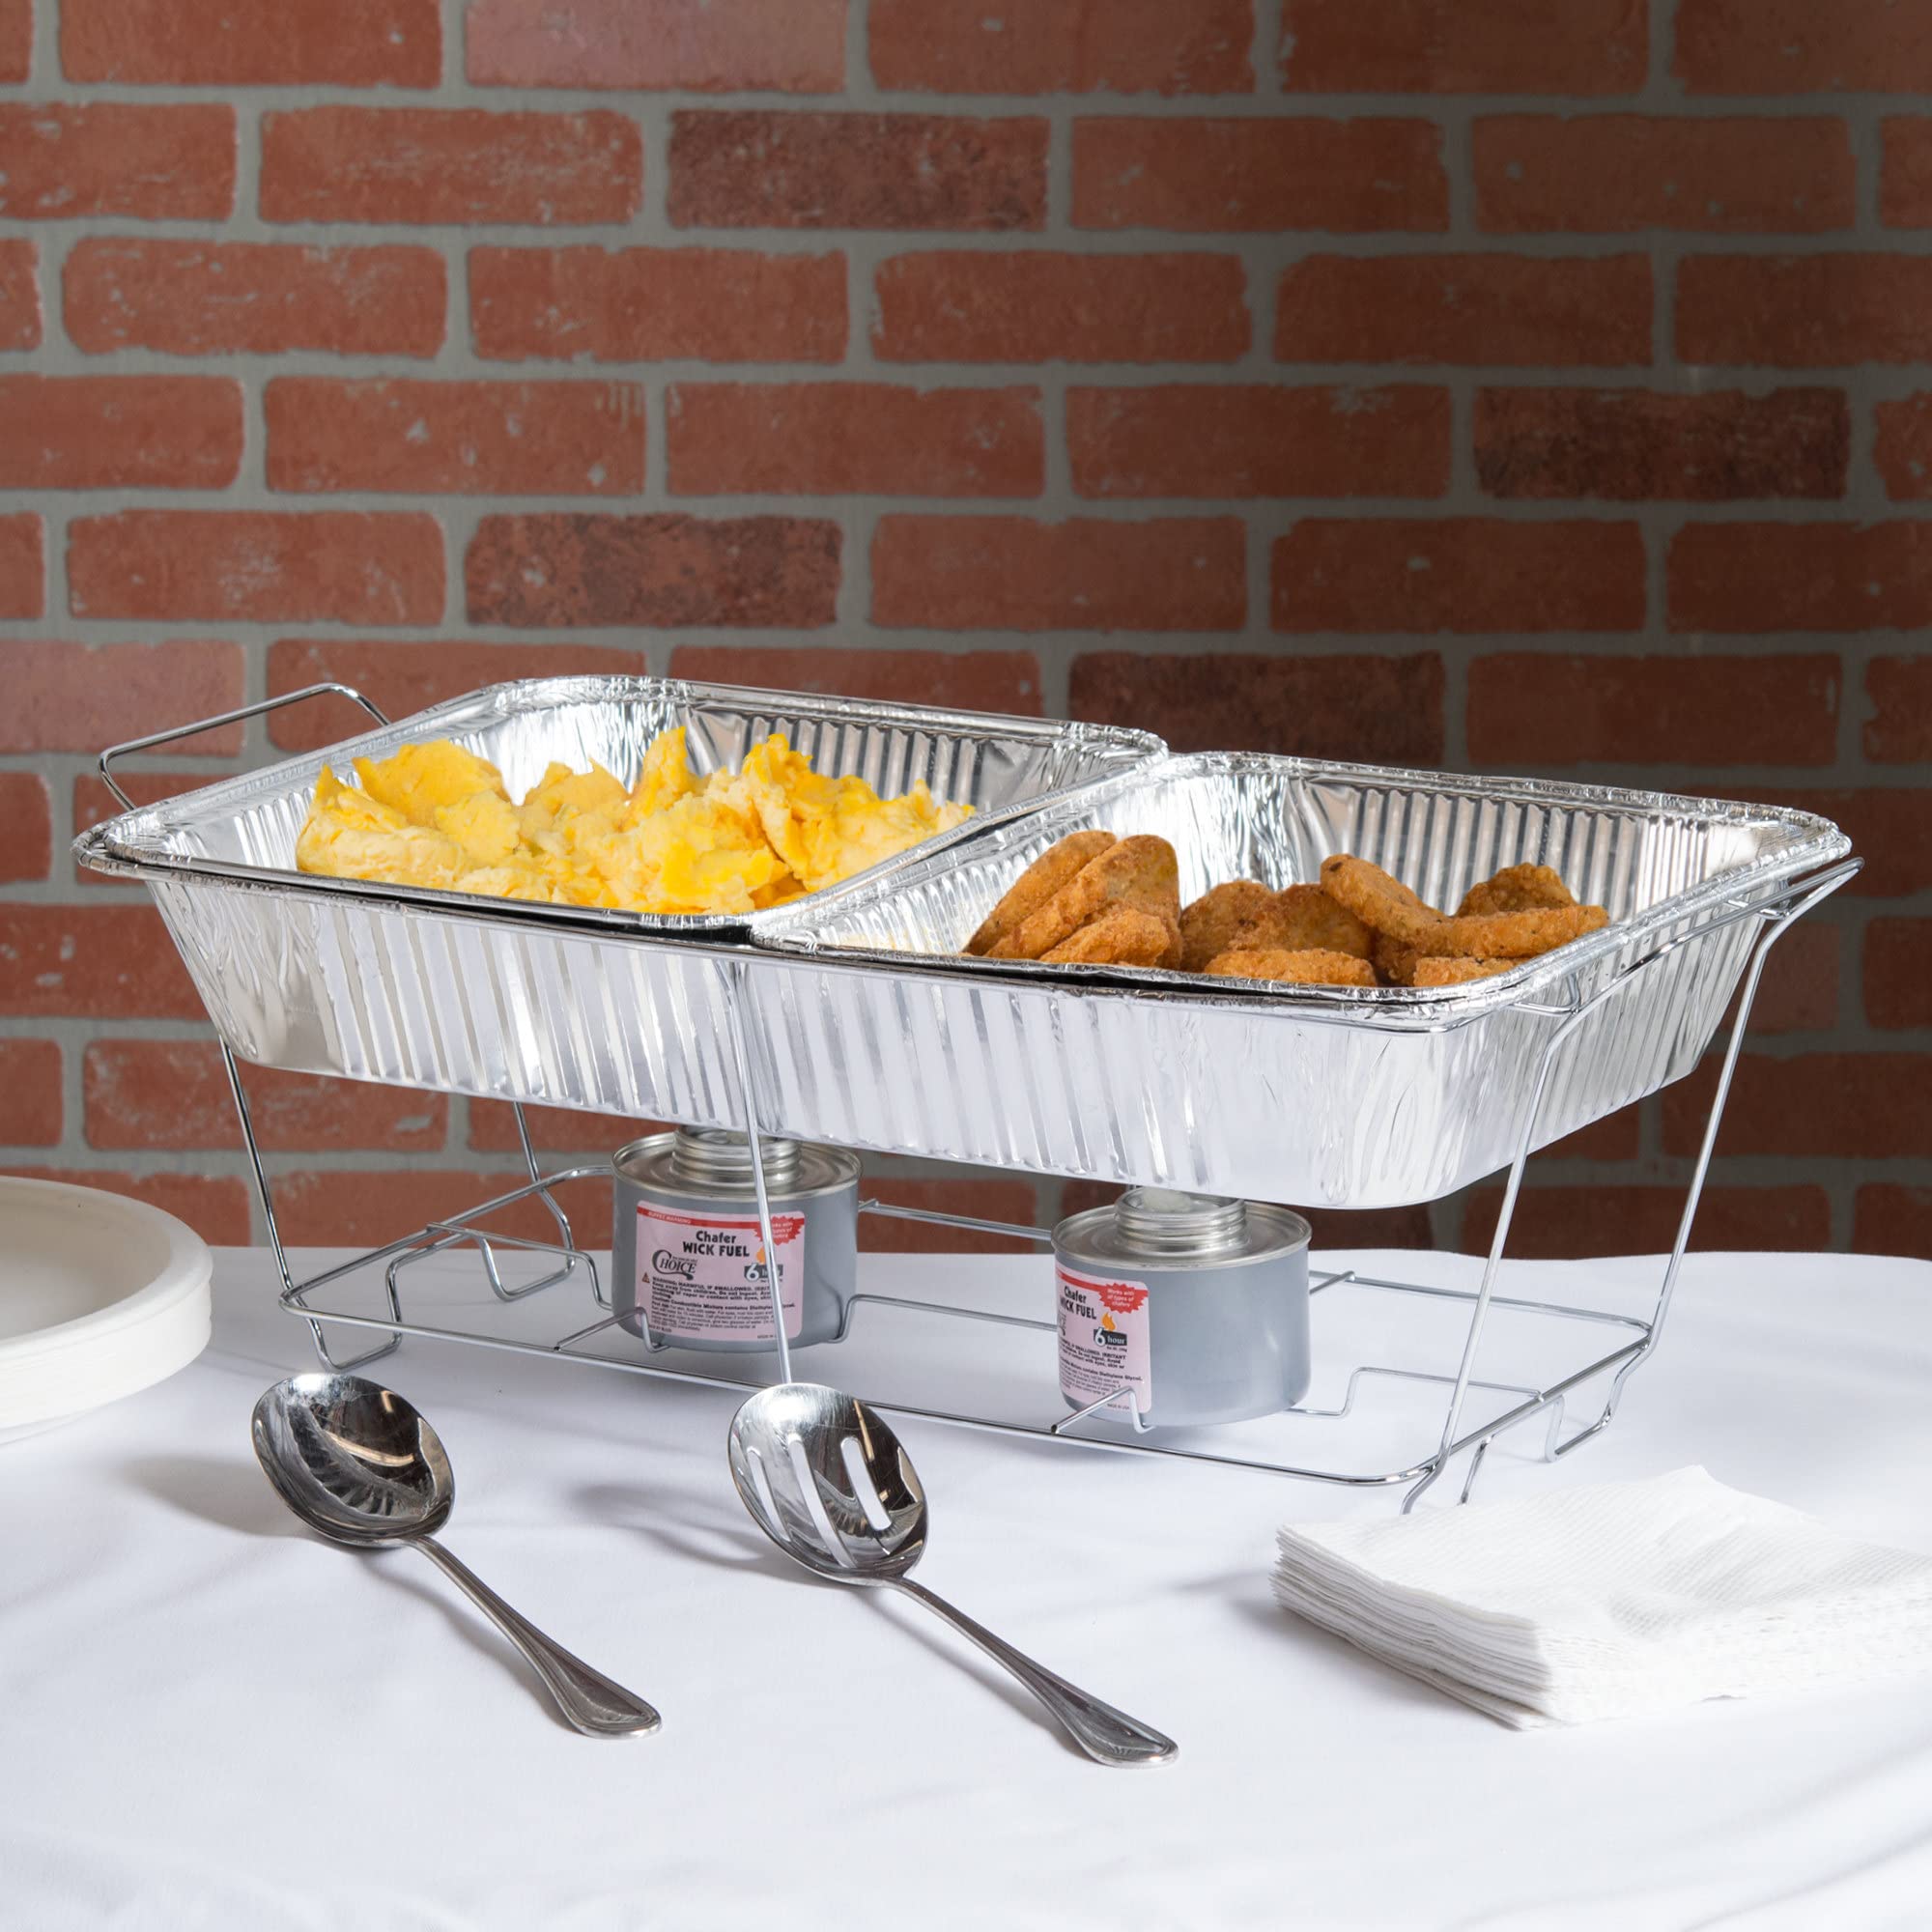 Nicole Fantini 36 Piece Party Buffet Serving Kit Includes Chafing Kits and Serving Utensils For All Types Of Parties And Events | Disposable Party Set Including Handy Lighters